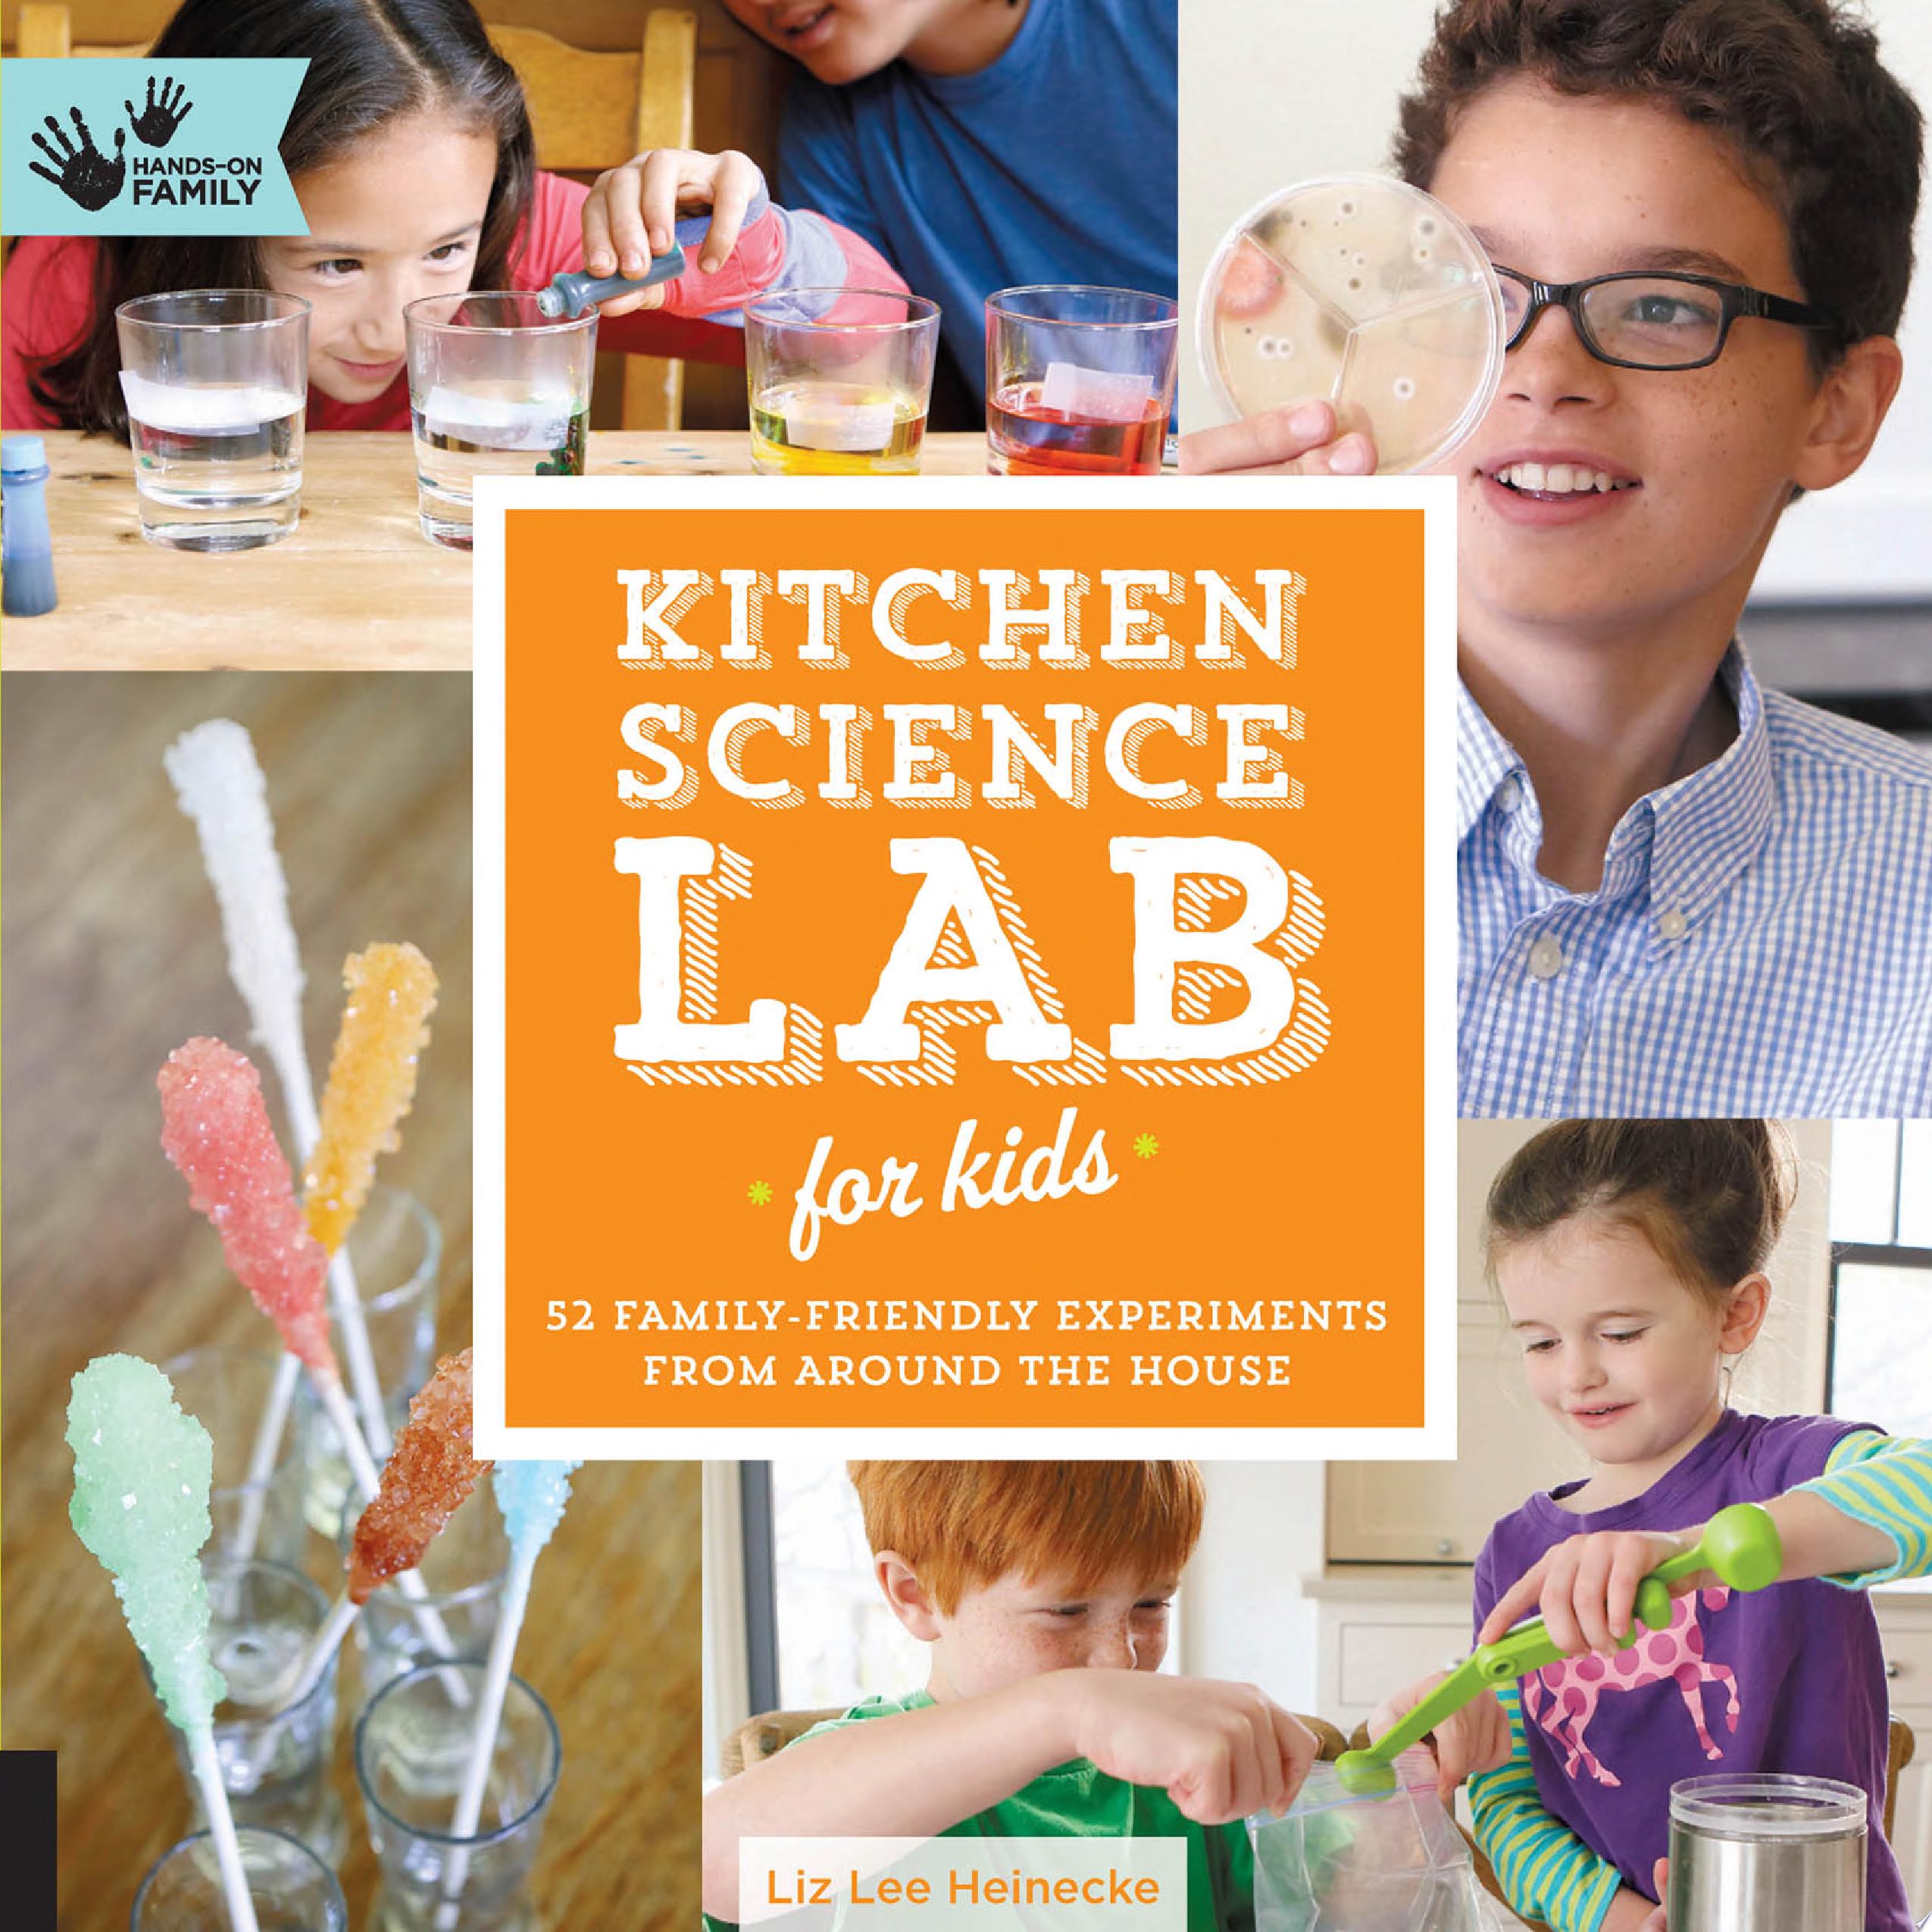 Image for "Kitchen Science Lab for Kids"